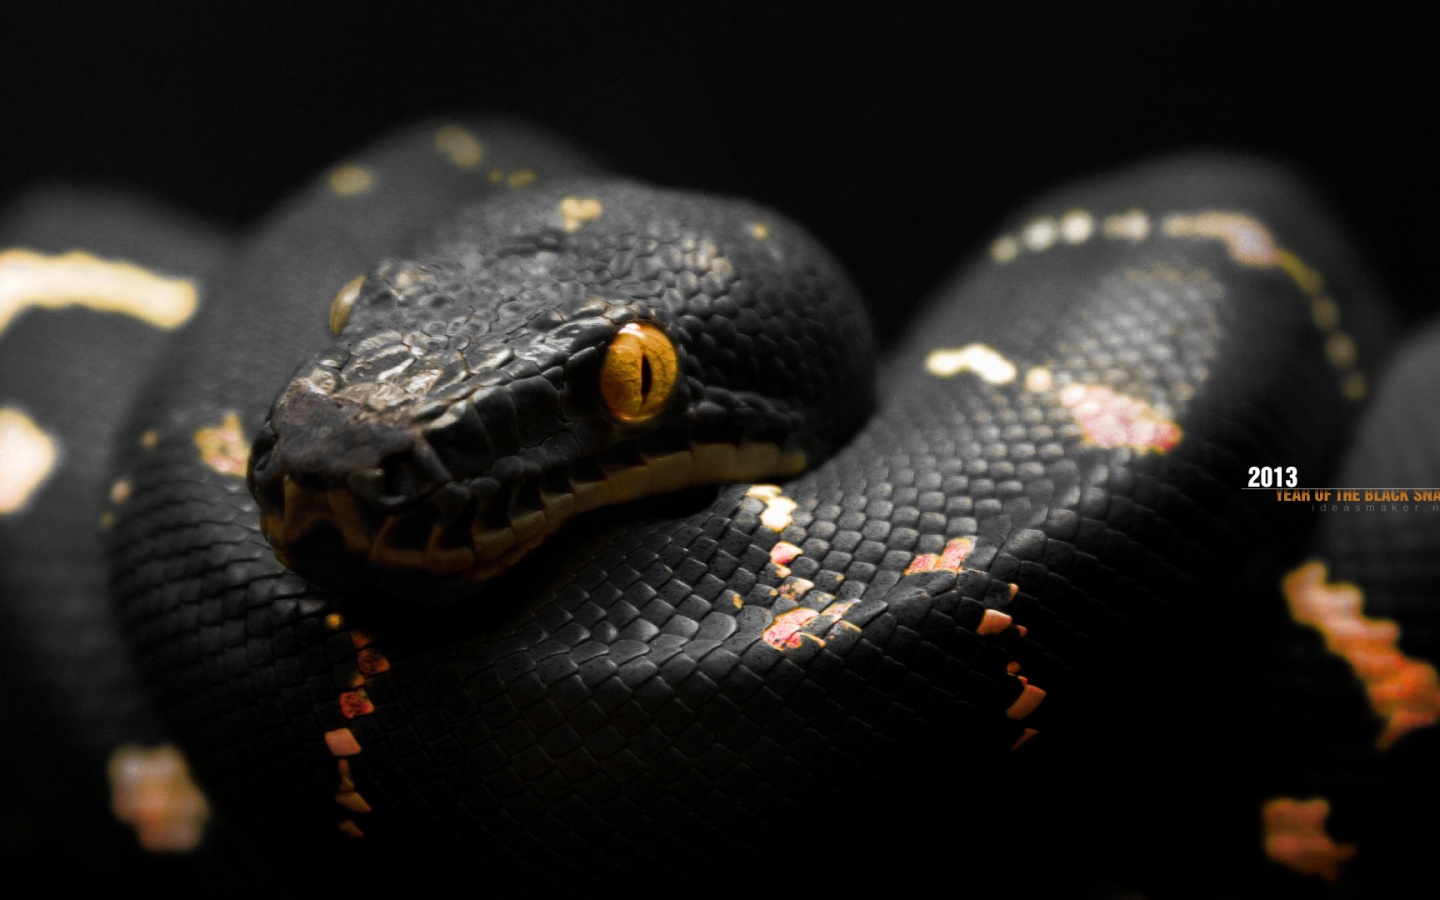 1440x900 2013 Year of The Black Snake desktop PC and Mac wallpaper